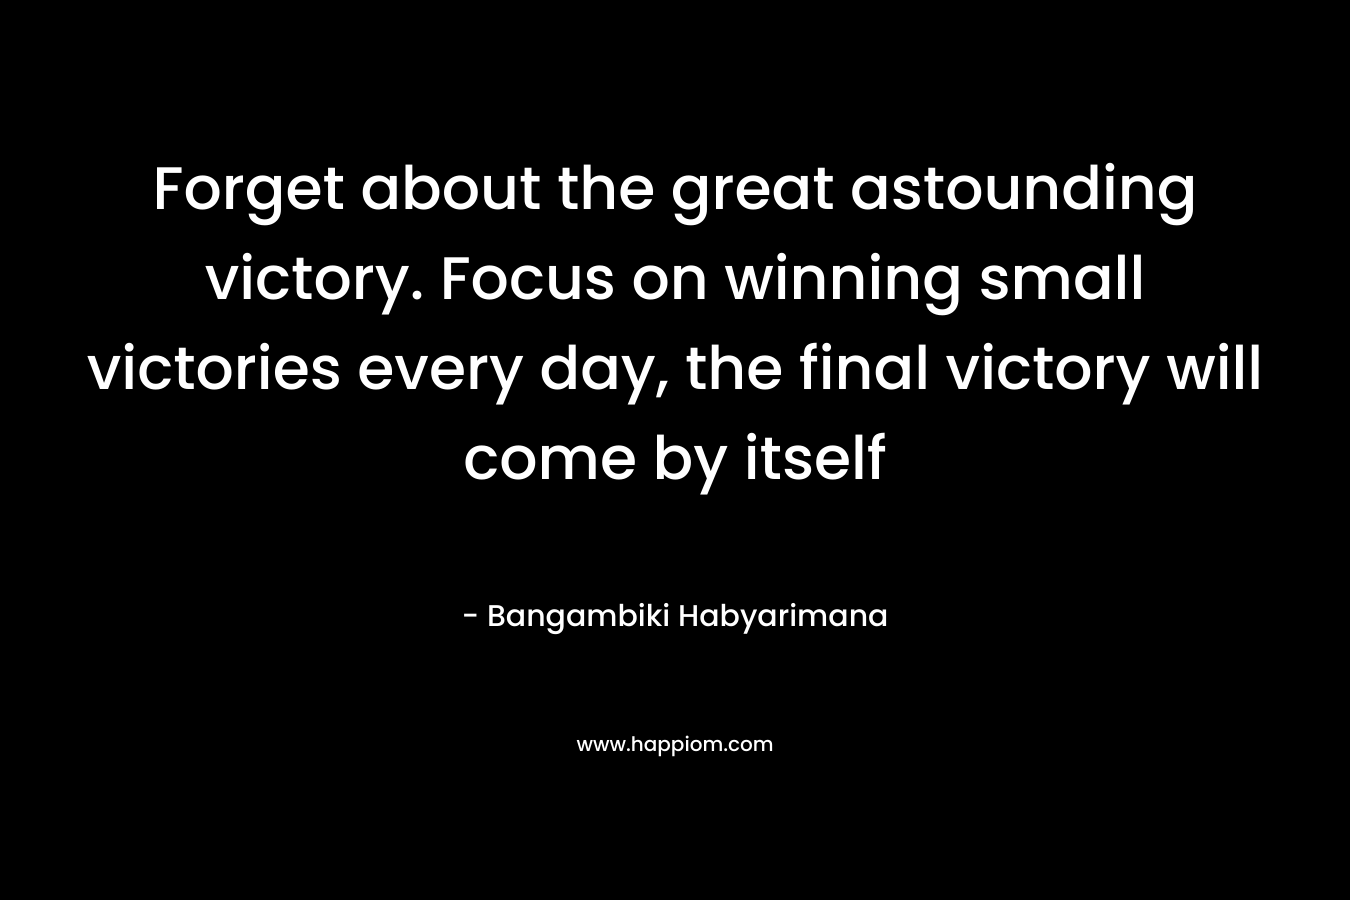 Forget about the great astounding victory. Focus on winning small victories every day, the final victory will come by itself